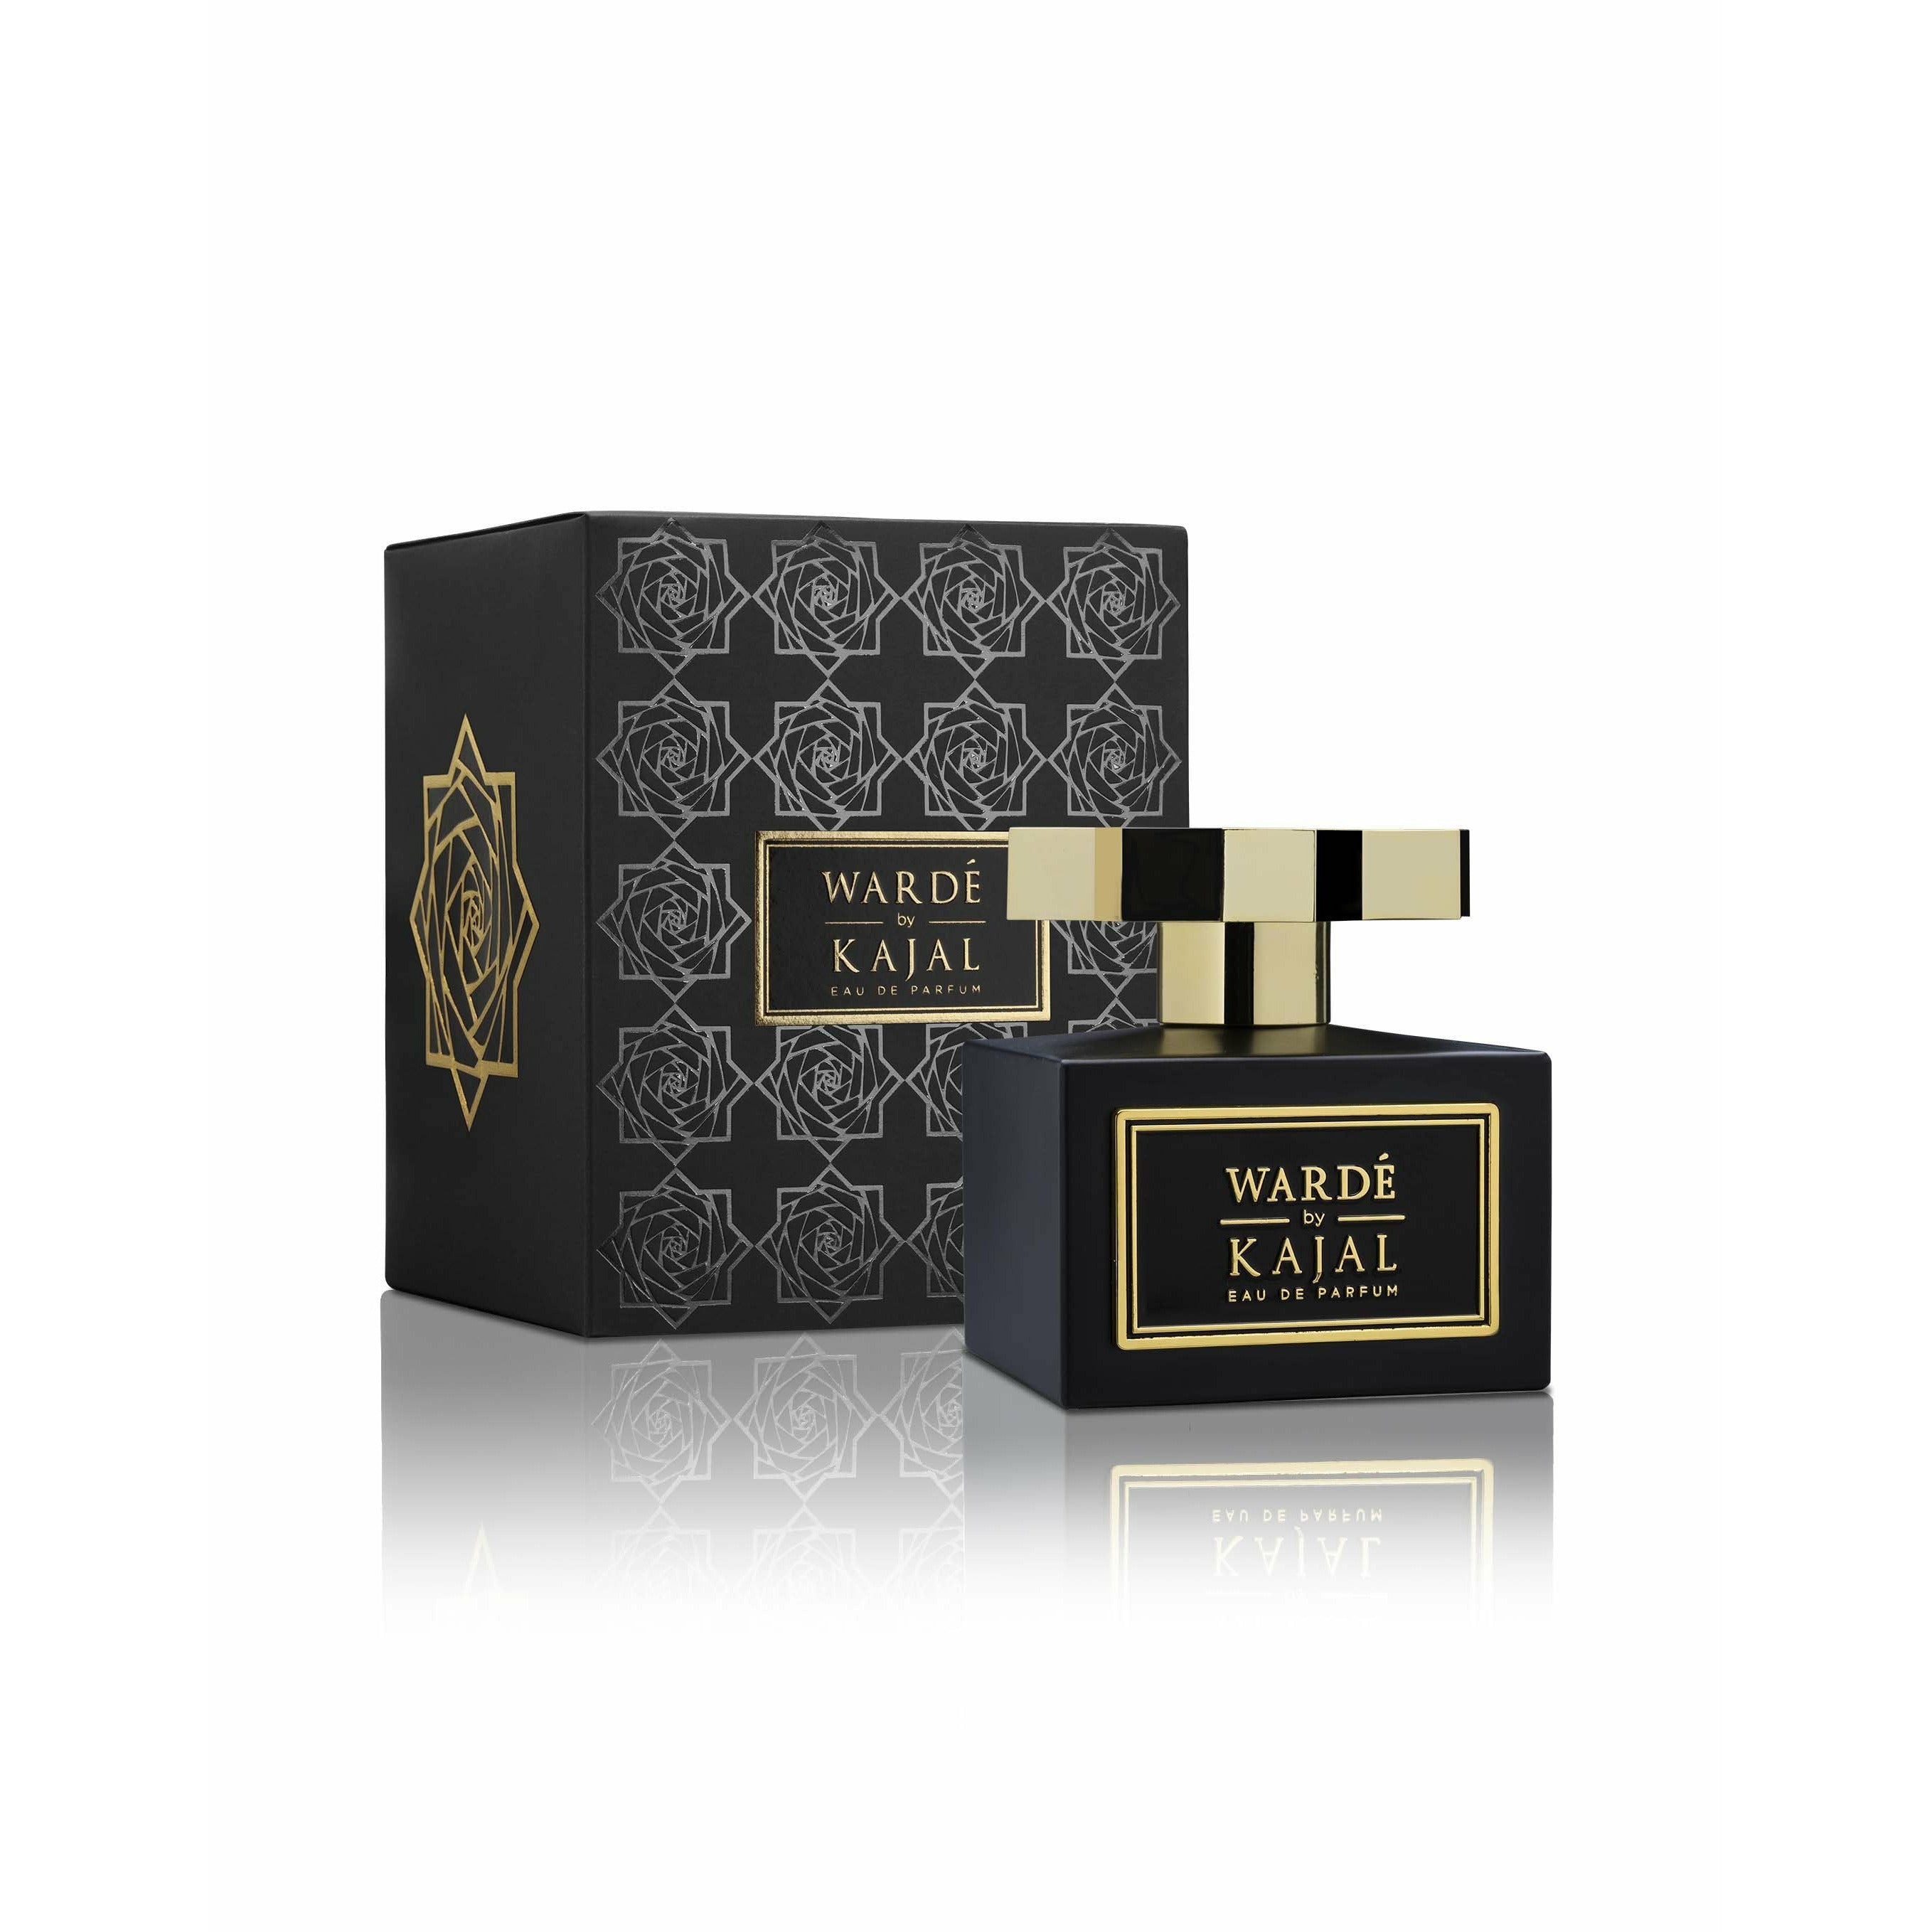 Warde EDP 100ml by Kajal Perfumes. Black cube bottle with gold logo and gold lid. Black carton box embossed with a black flower pattern to one side and a black and gold flower to the other side.